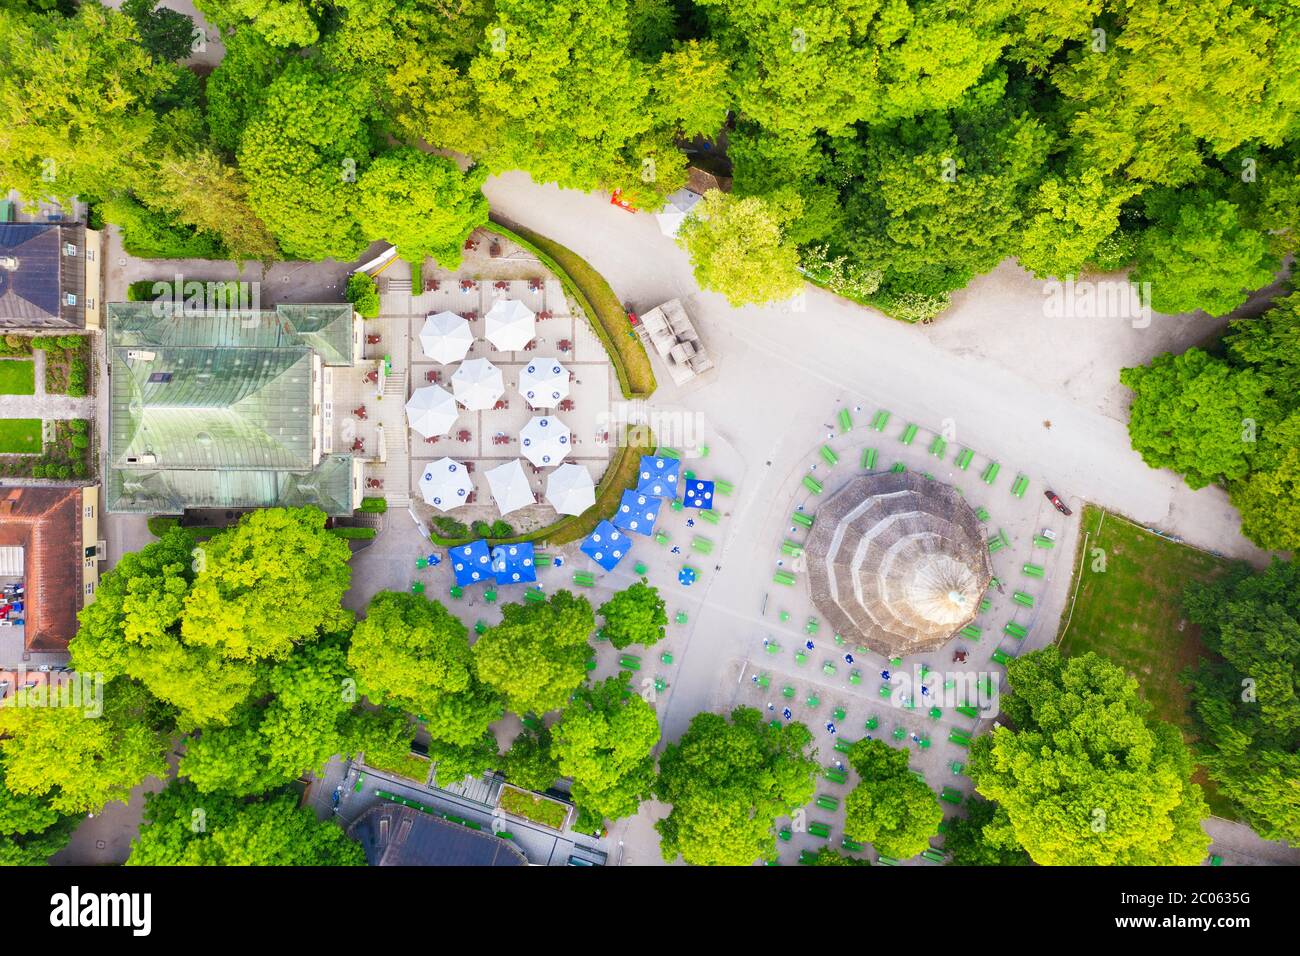 Chinese tower with beer garden from above, English garden, Munich, aerial view, Upper Bavaria, Bavaria, Germany Stock Photo